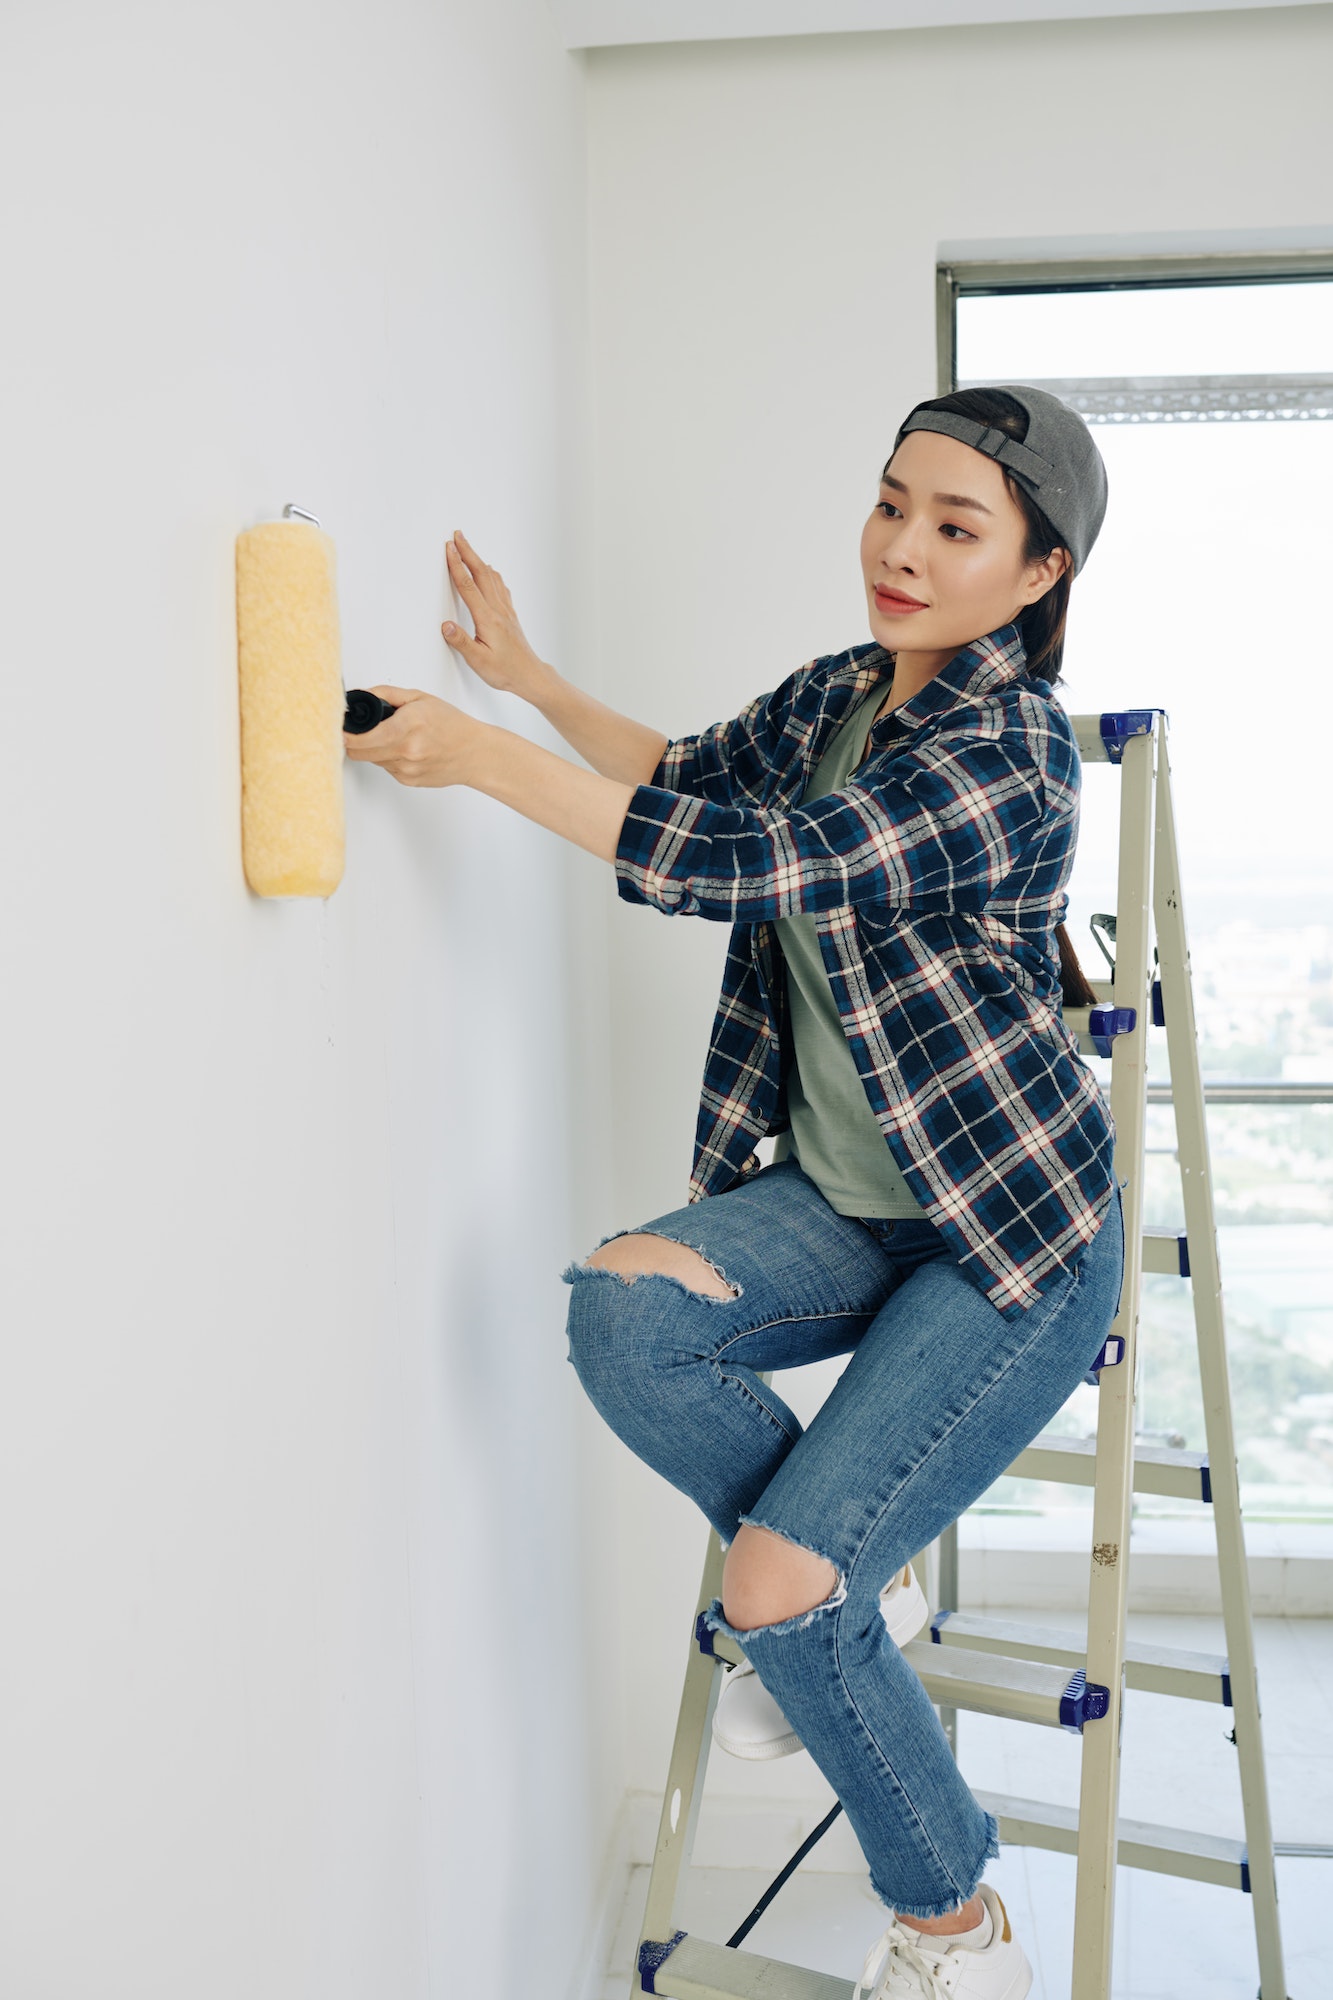 Woman painting house wall